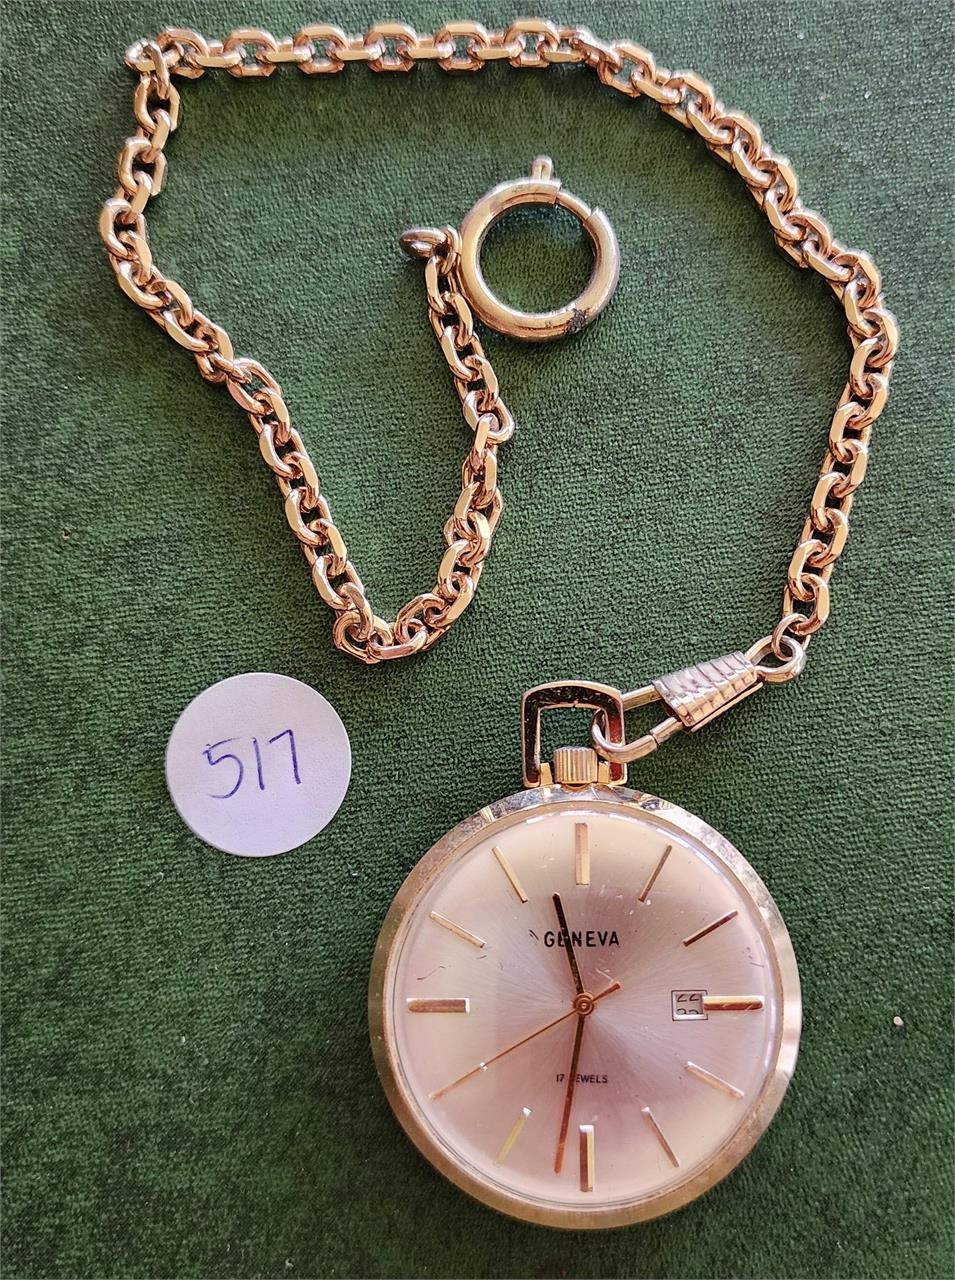 PocketWatch (could not get open, untested)